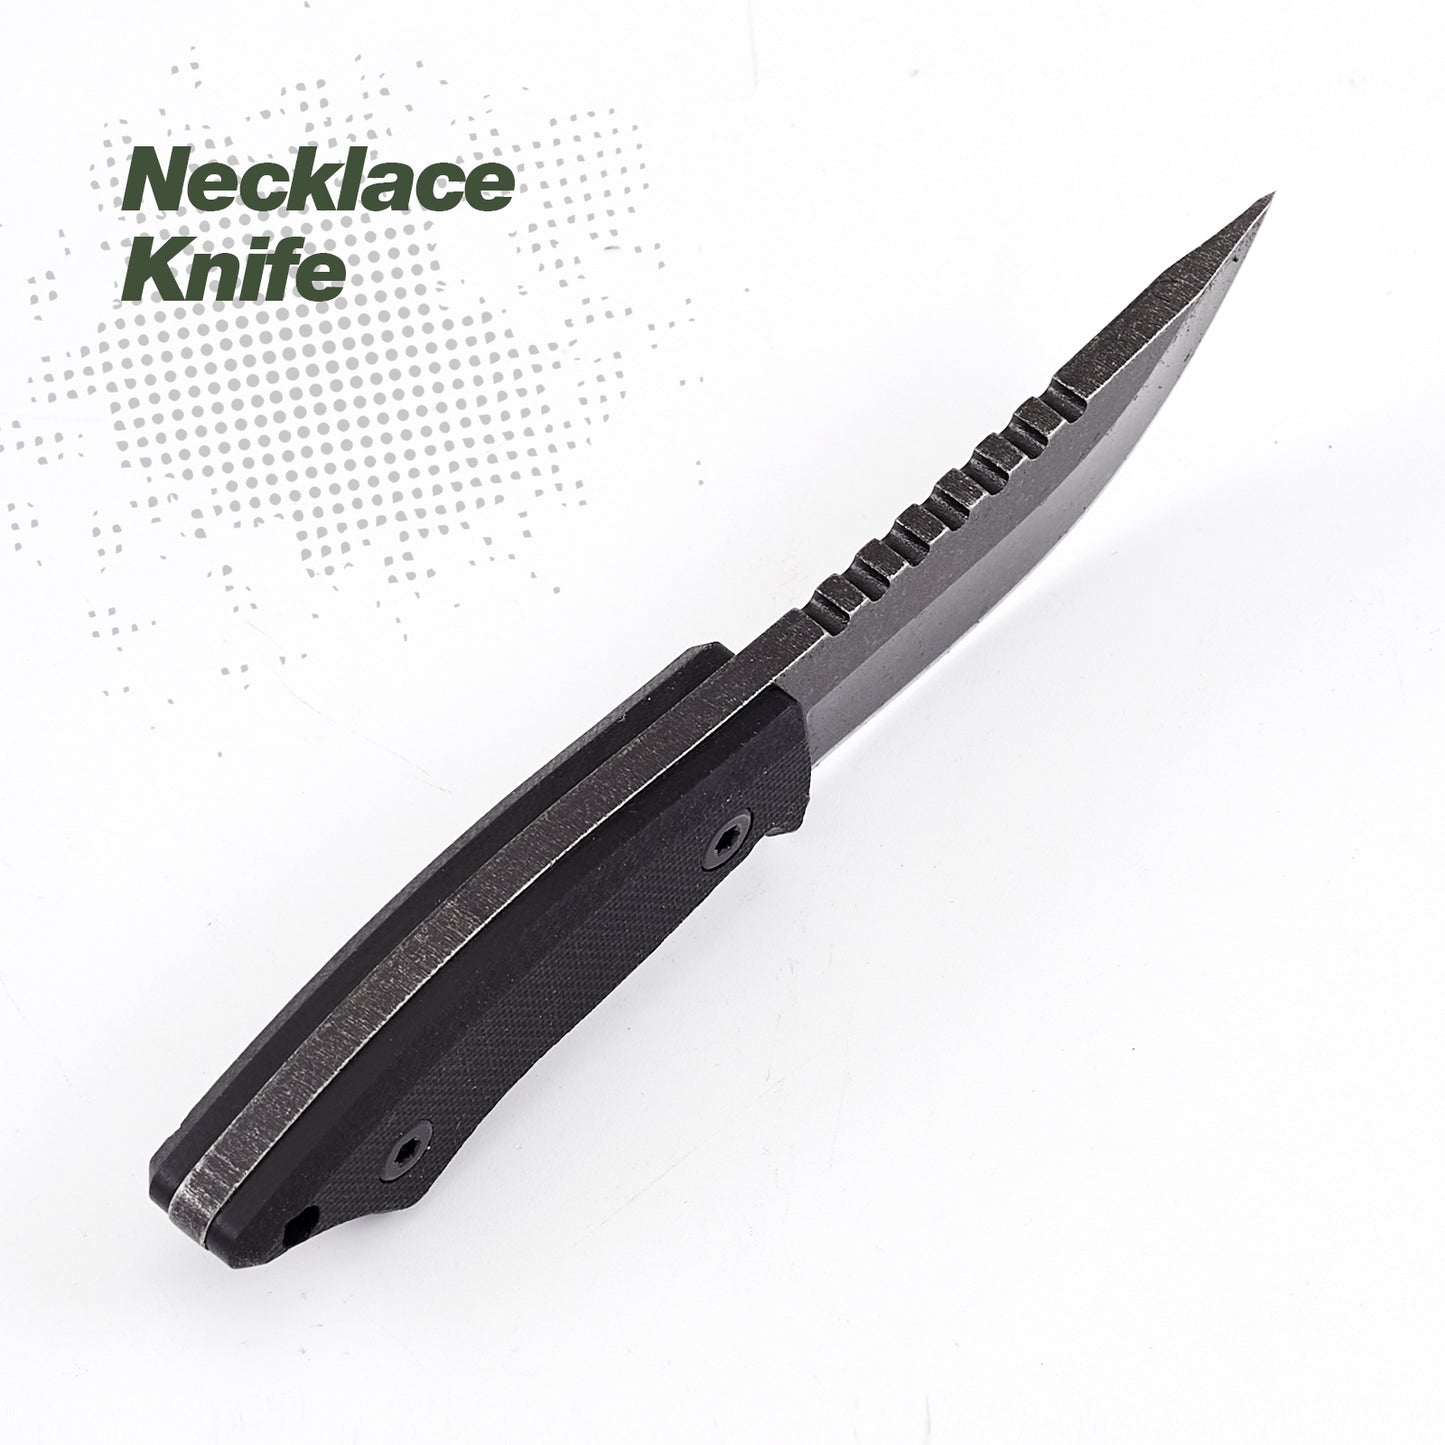 KHU Neck Knife Fixed Blade EDC Knife - Knife Necklace Mini Knife Survival Knife Neck Knives - D2 Steel G10 Handle - Outdoor Hunting Camping Gear with kydex Sheath -10A